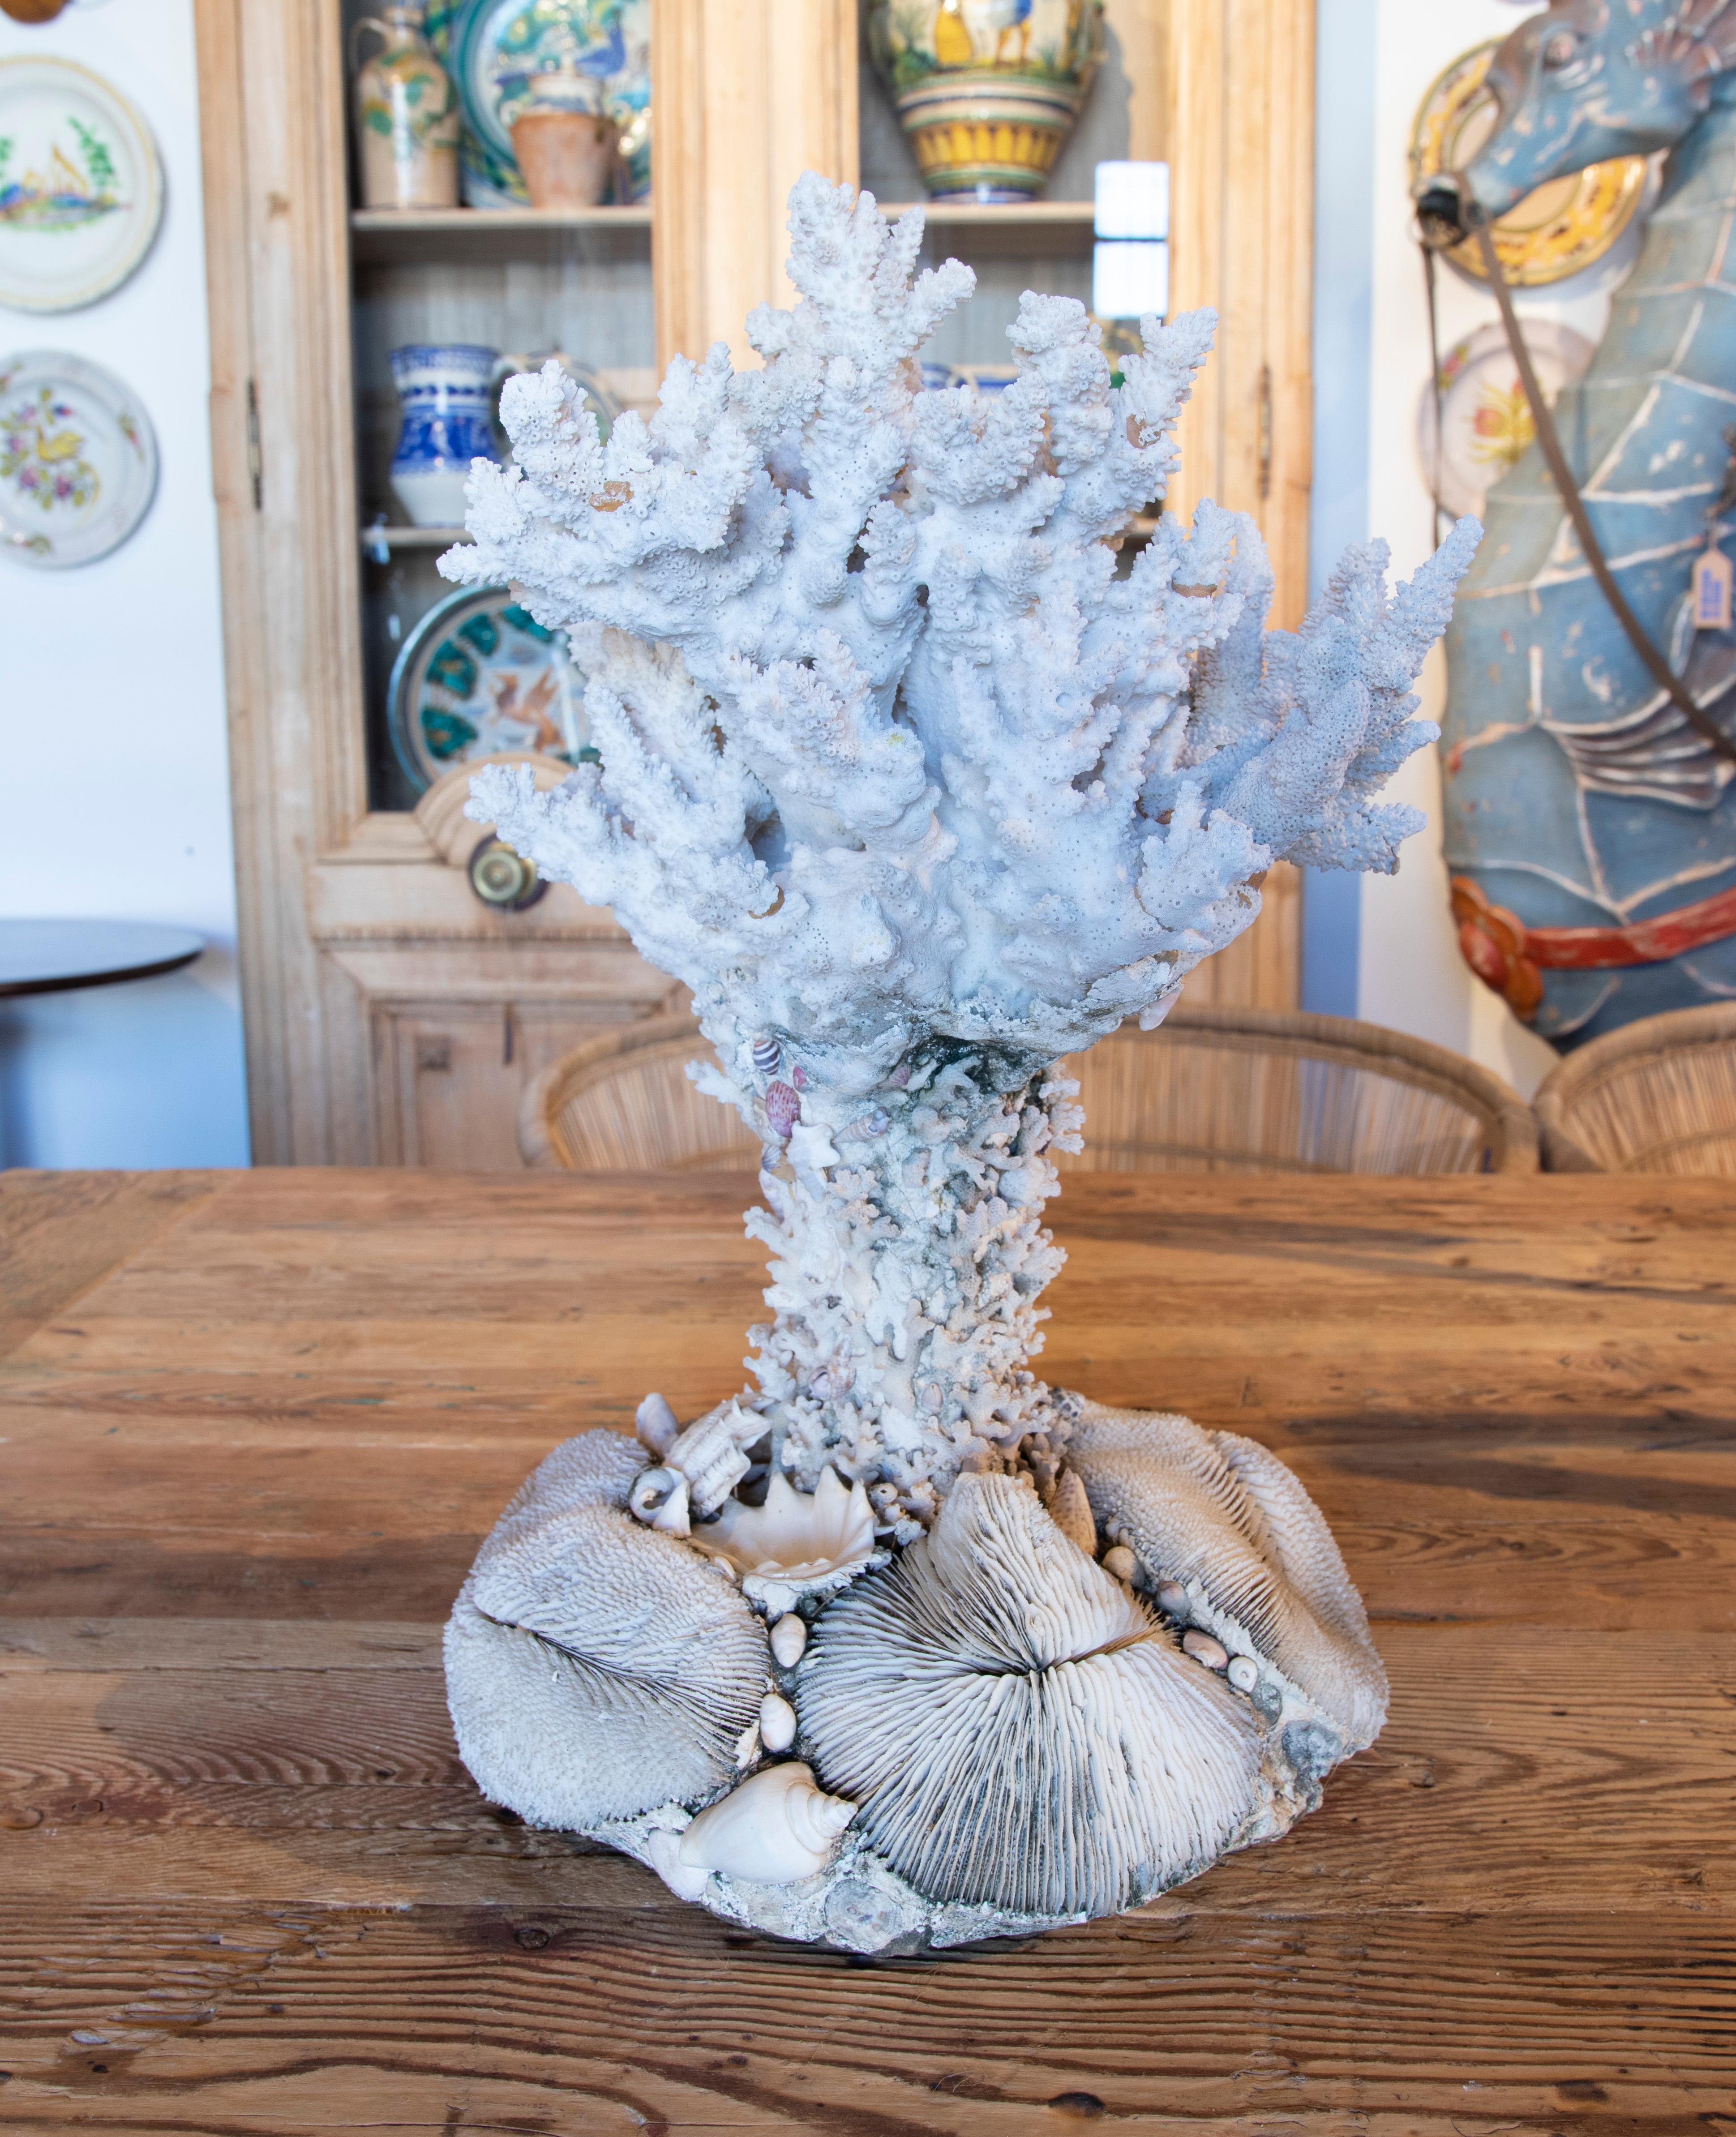 1950s sculpture made of corals and shells.